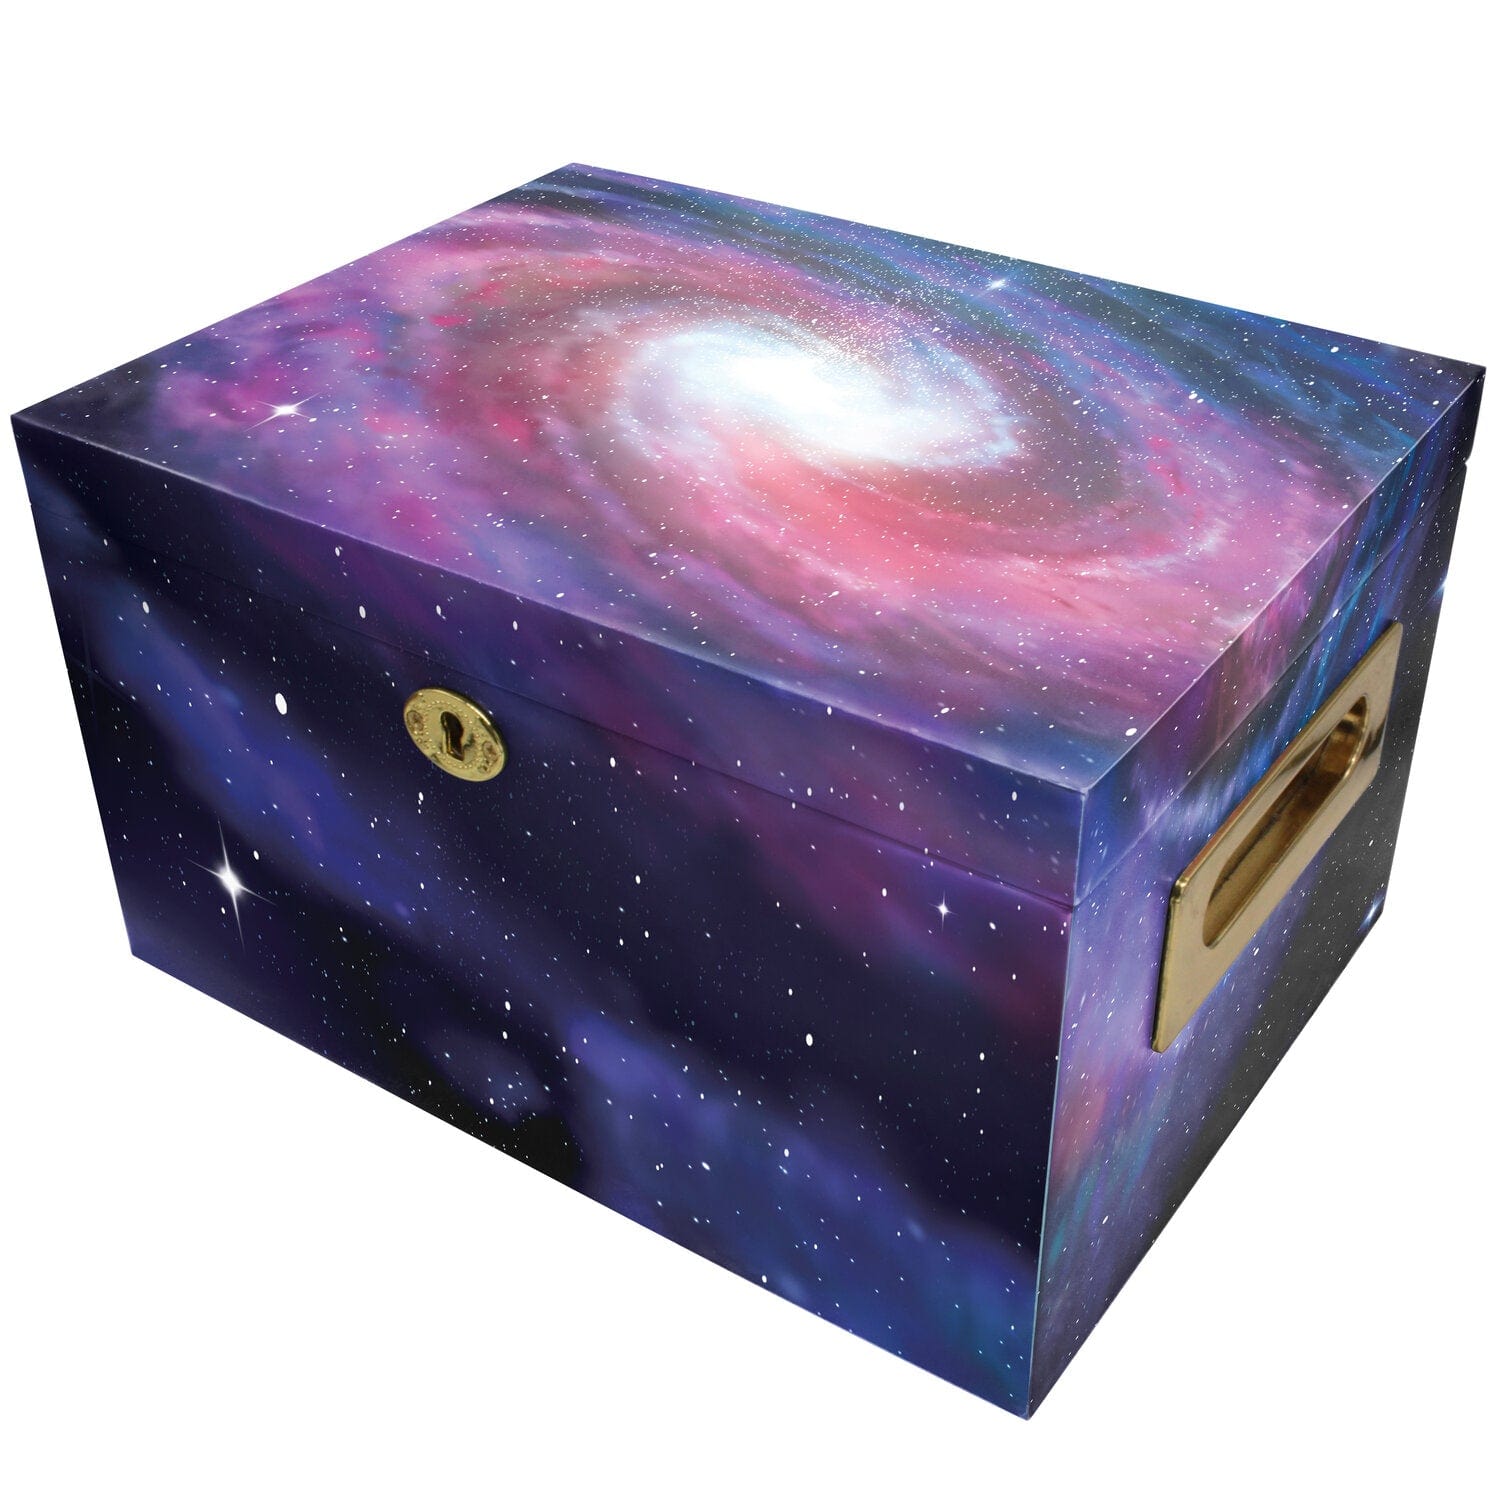 Commemorative Cremation Urns Home & Garden Urn Collection Chest Celestial Galaxy Memorial Collection Chest Cremation Urn